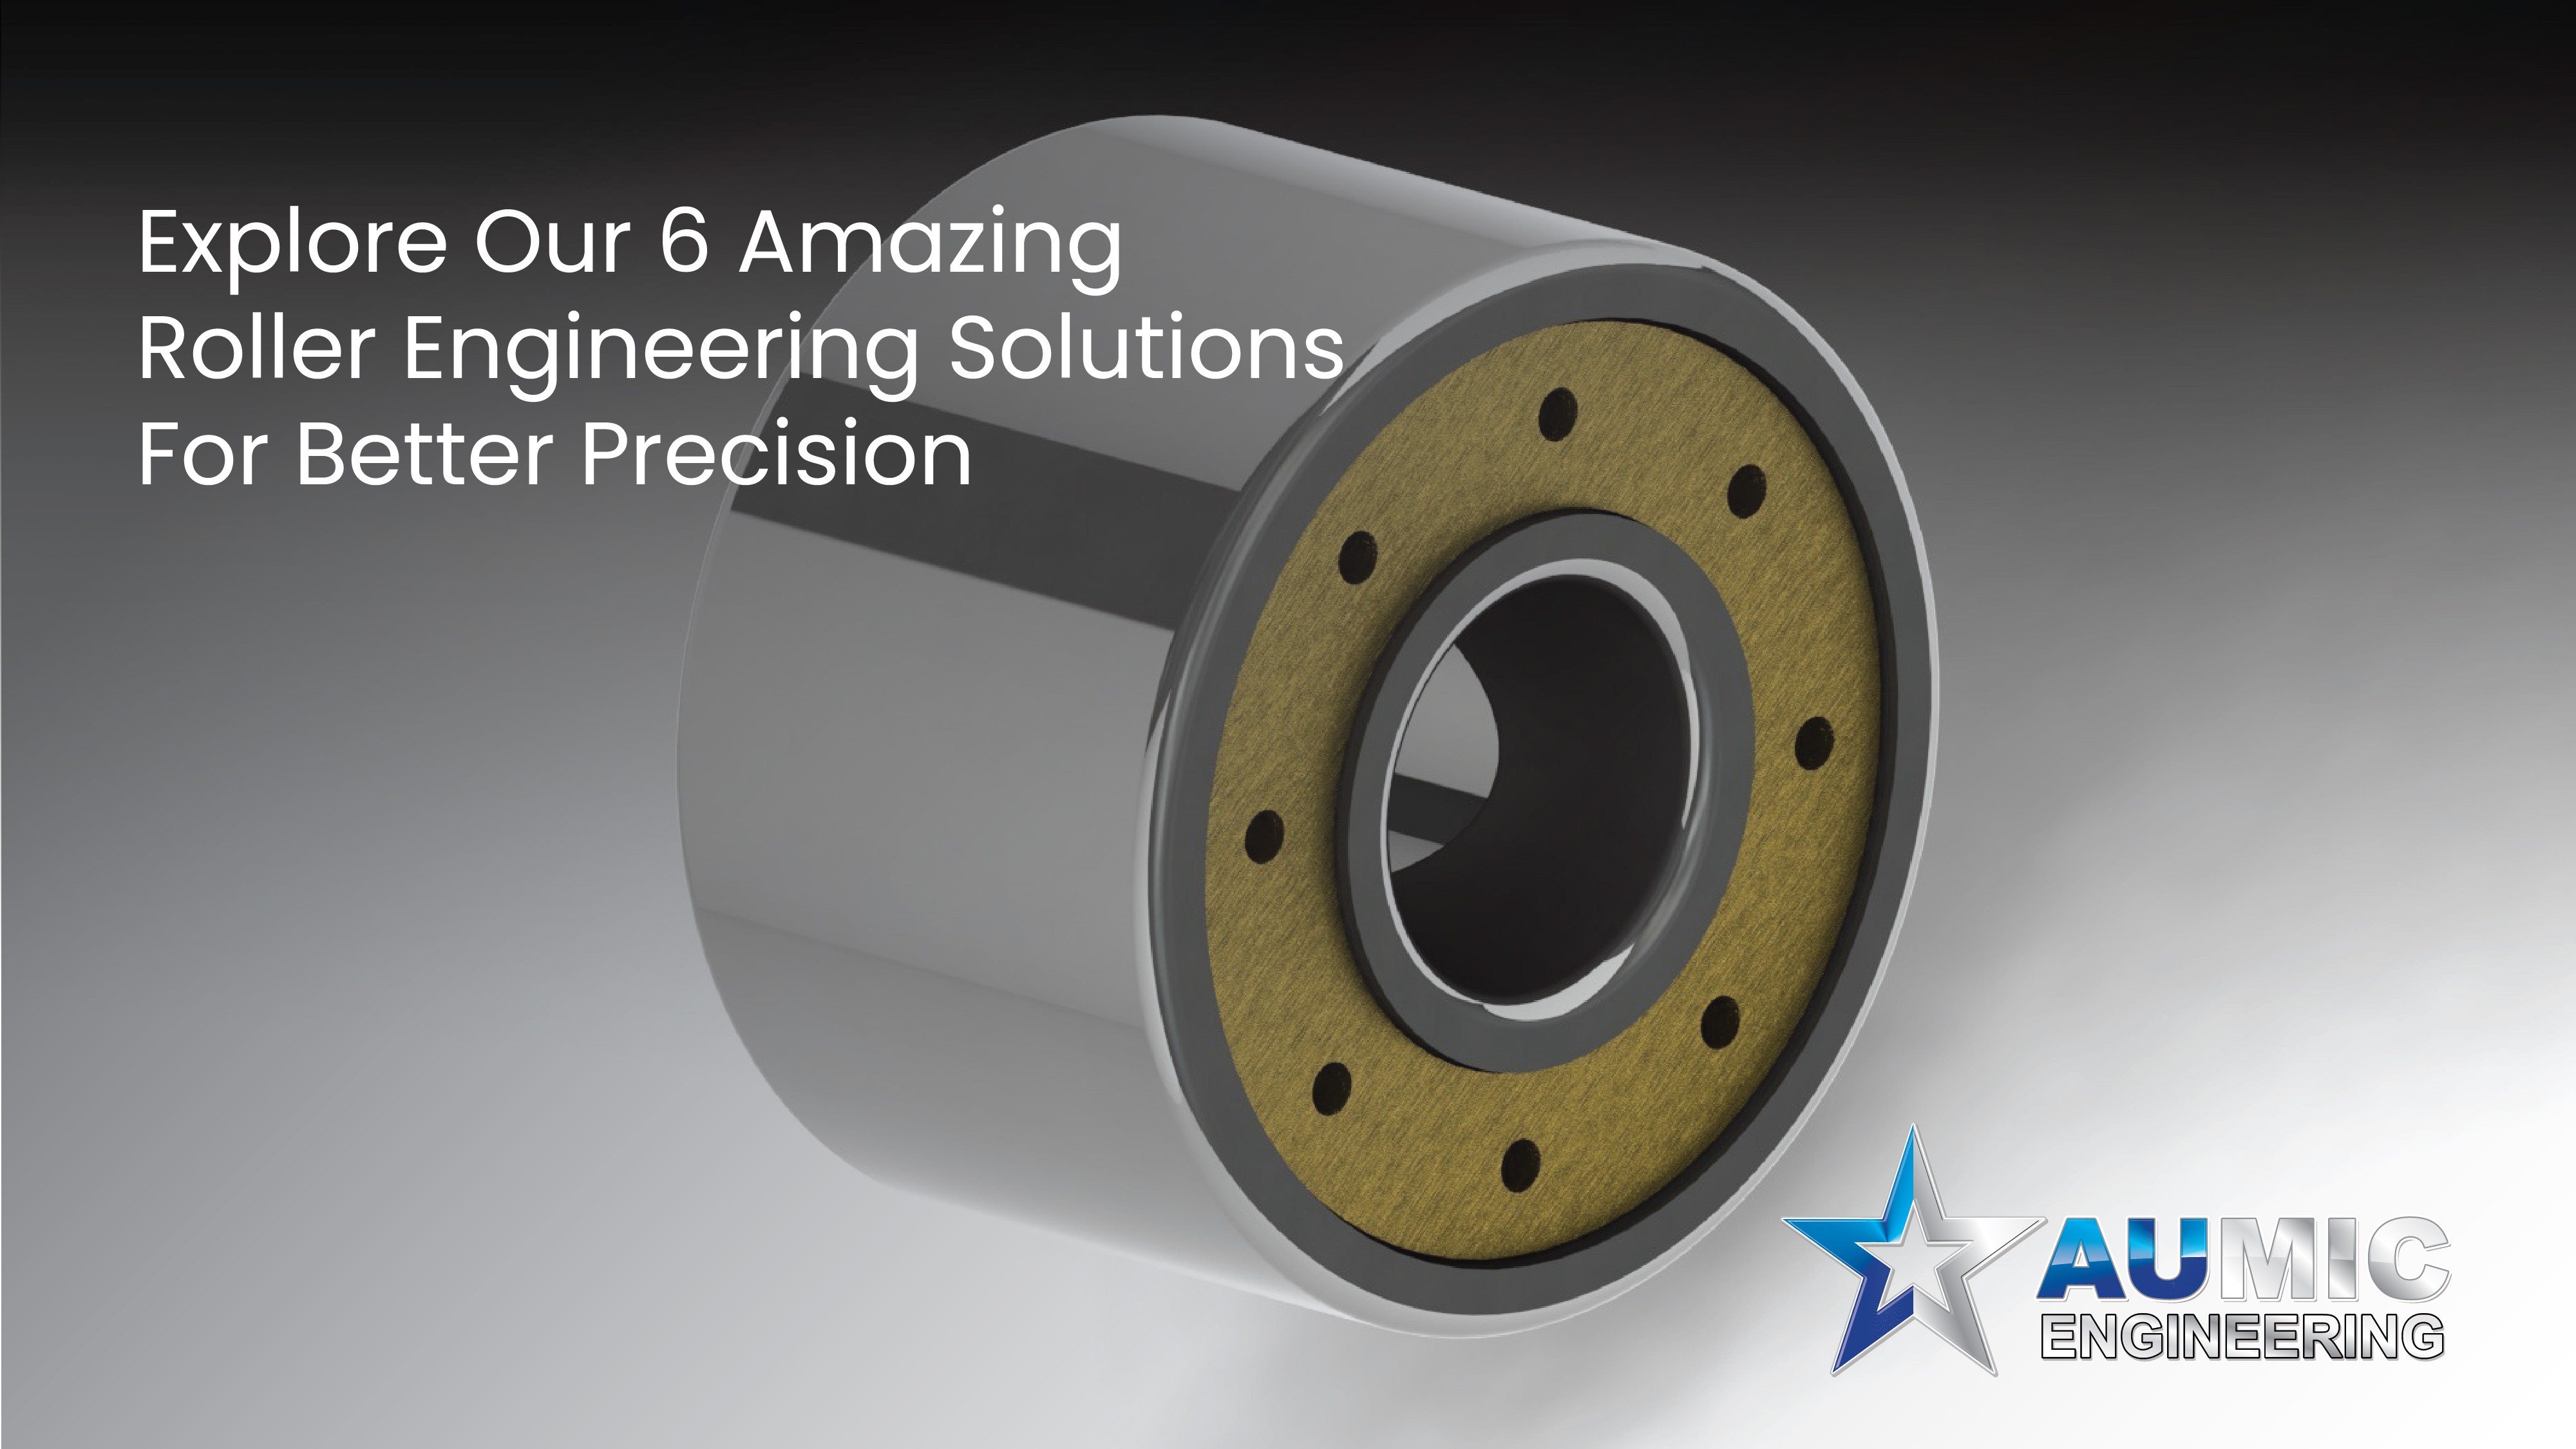 rolling engineering solutions for you, an article by Aumic Engineering - Skye Mallon (Author)